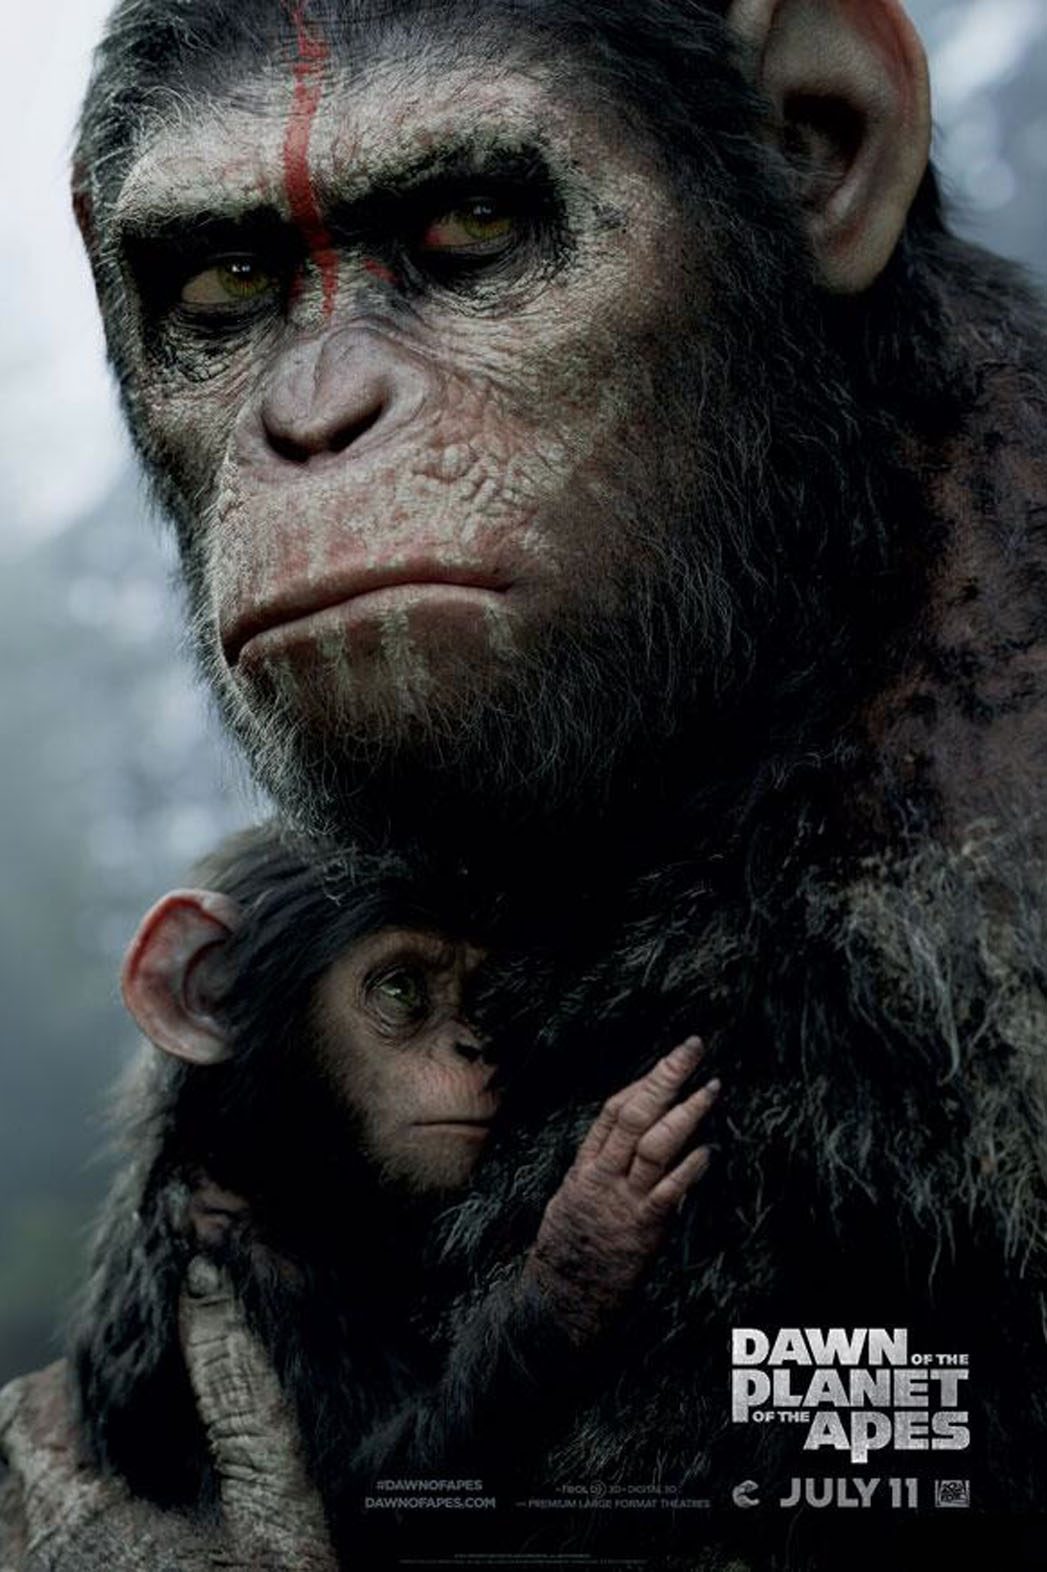 New 'Dawn of the Planet of the Apes' Trailer Swings In - mxdwn Movies